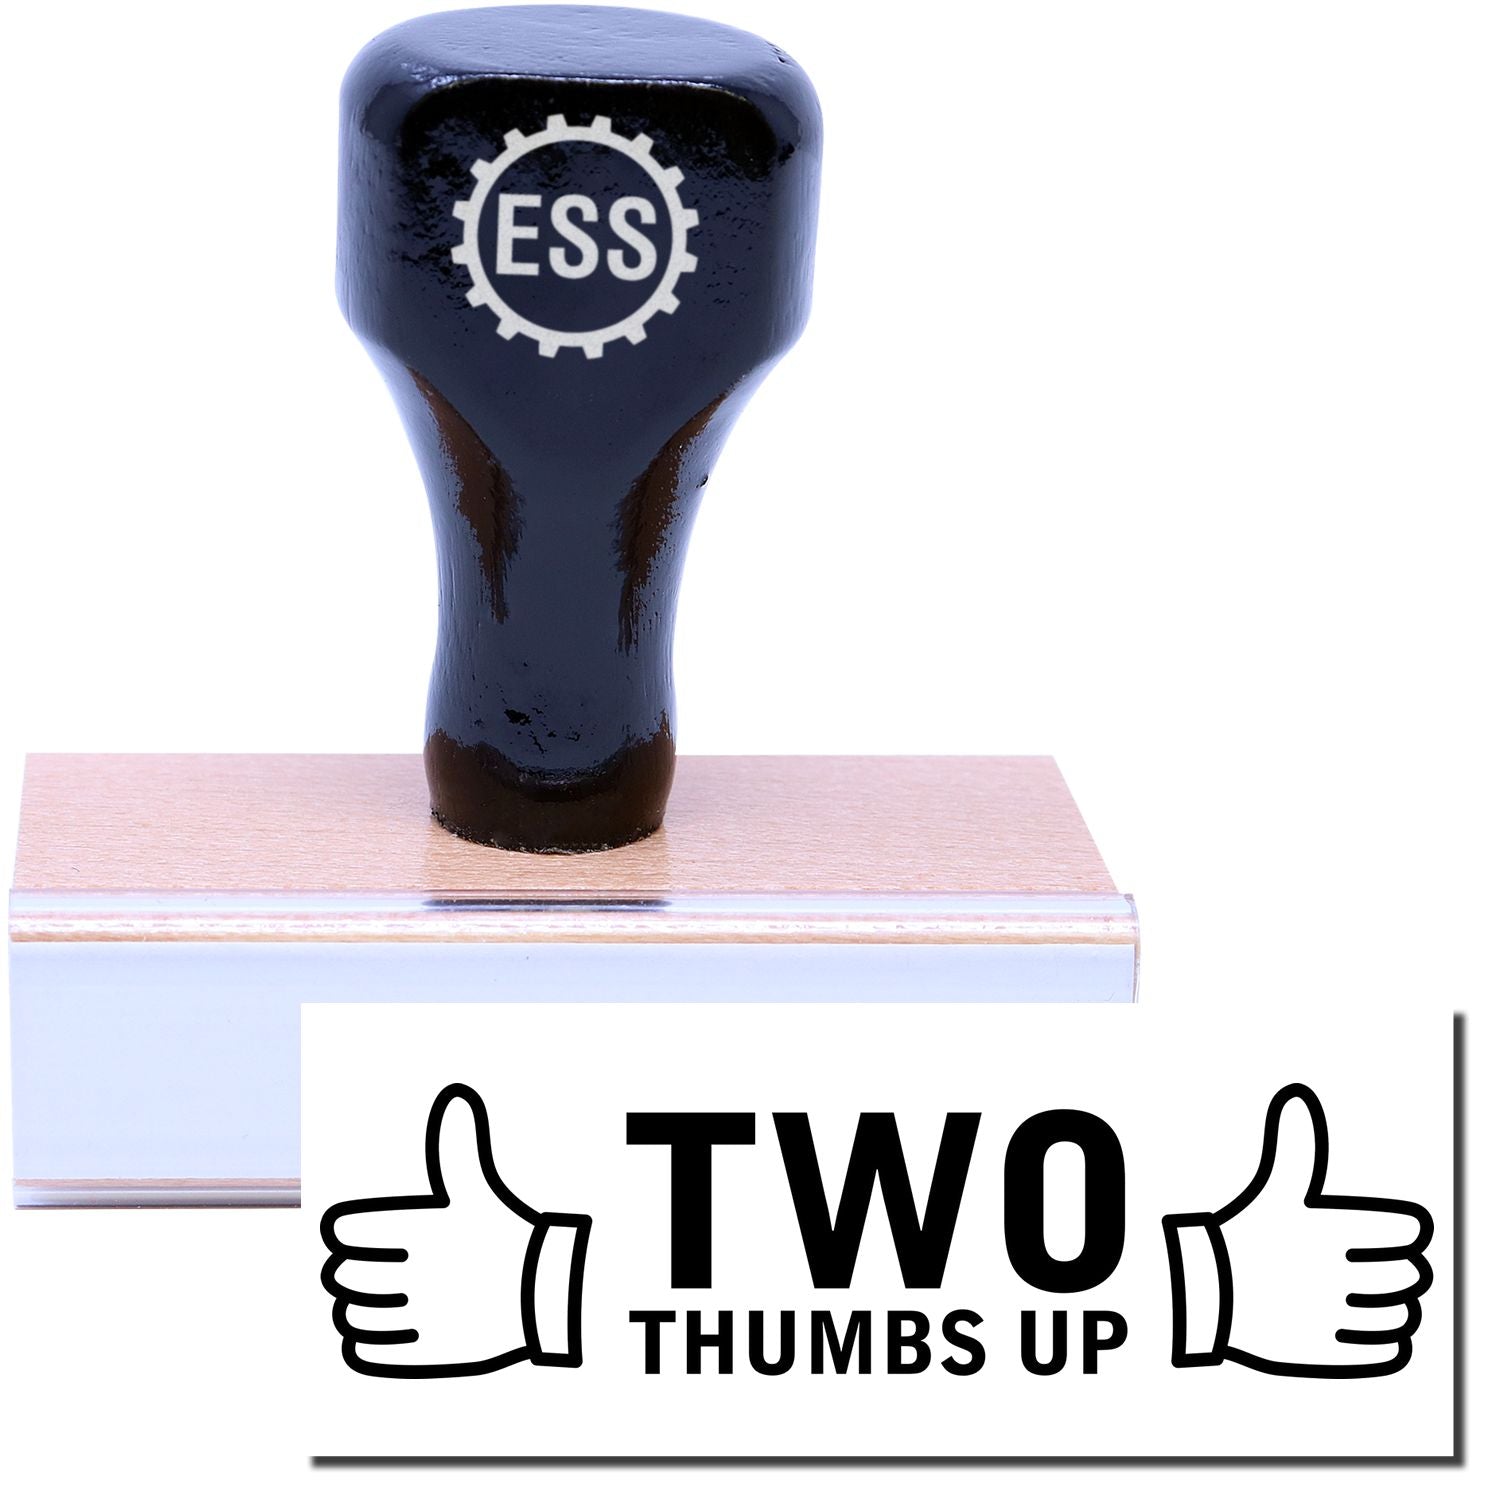 A stock office rubber stamp with a stamped image showing how the text "TWO THUMBS UP" in large font with two thumbs pointing up on each side of the text is displayed after stamping.